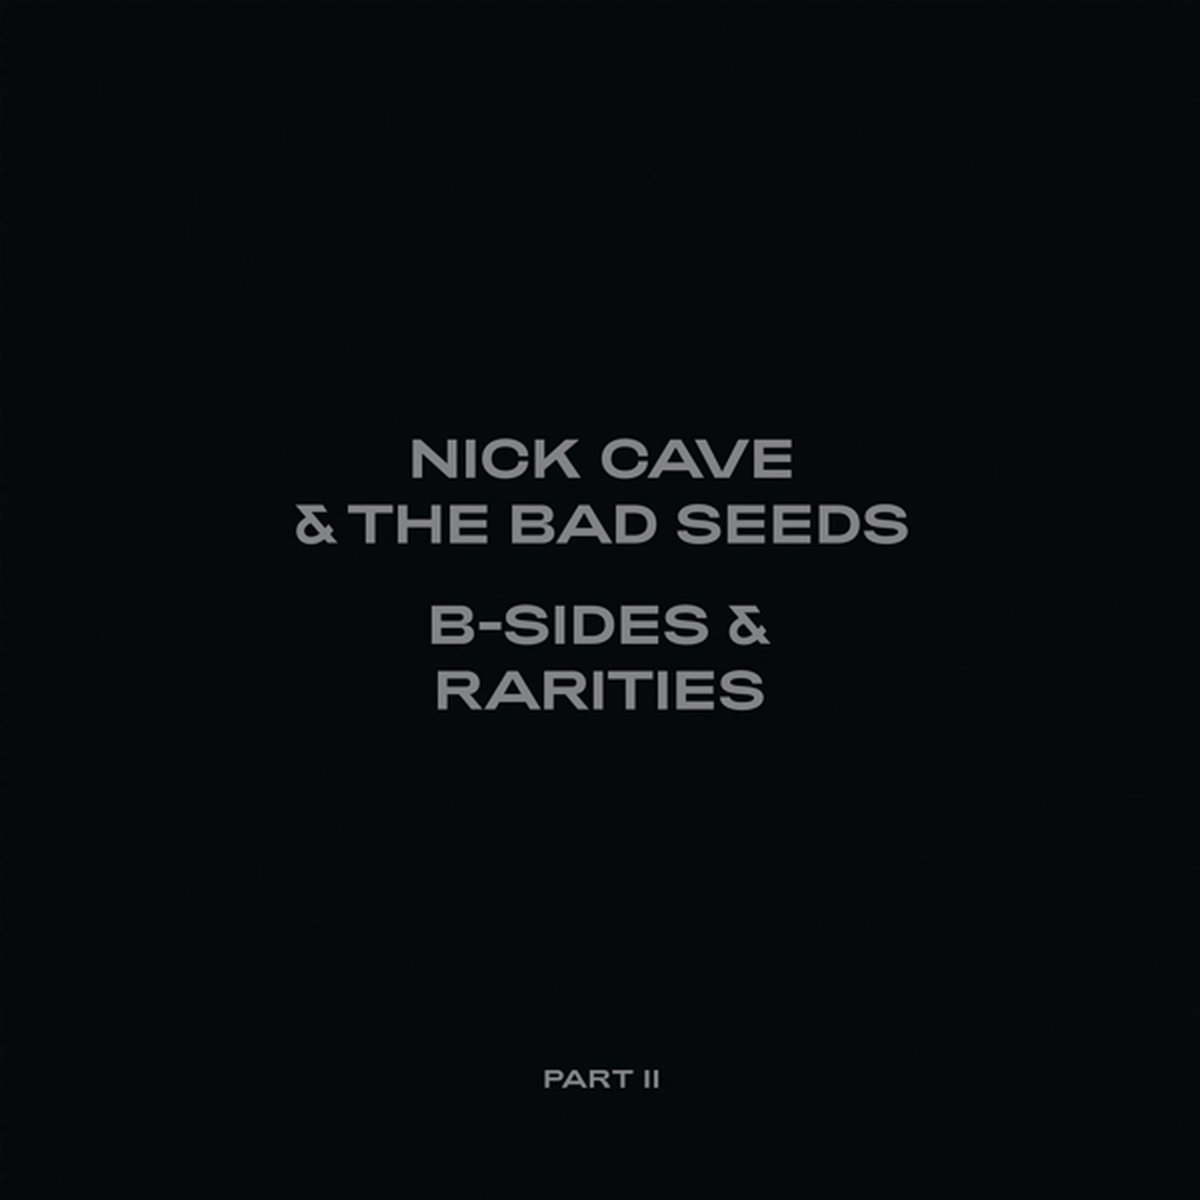 B-sides & Rarities: Part II (CD) - Nick Cave & The Bad Seeds